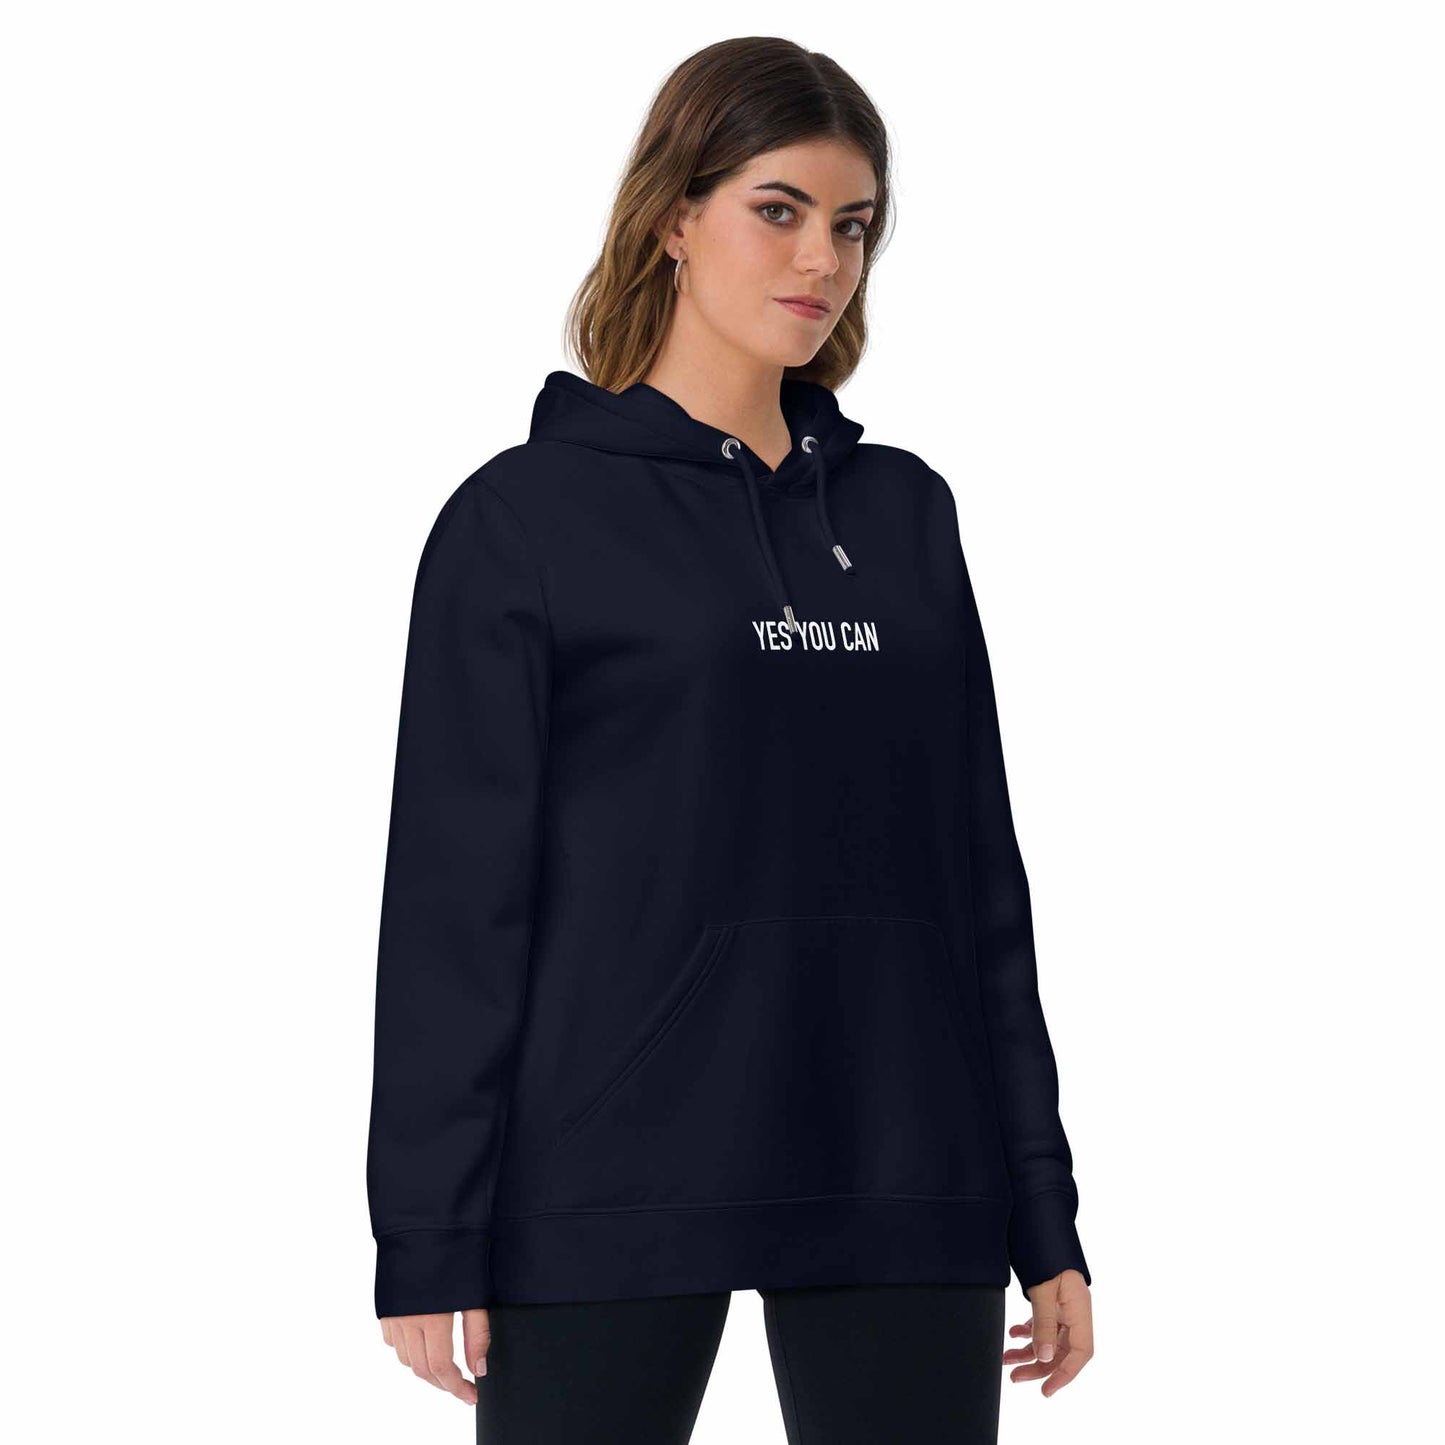 Women navy inspirational hoodie with inspirational quote, "Yes You Can."